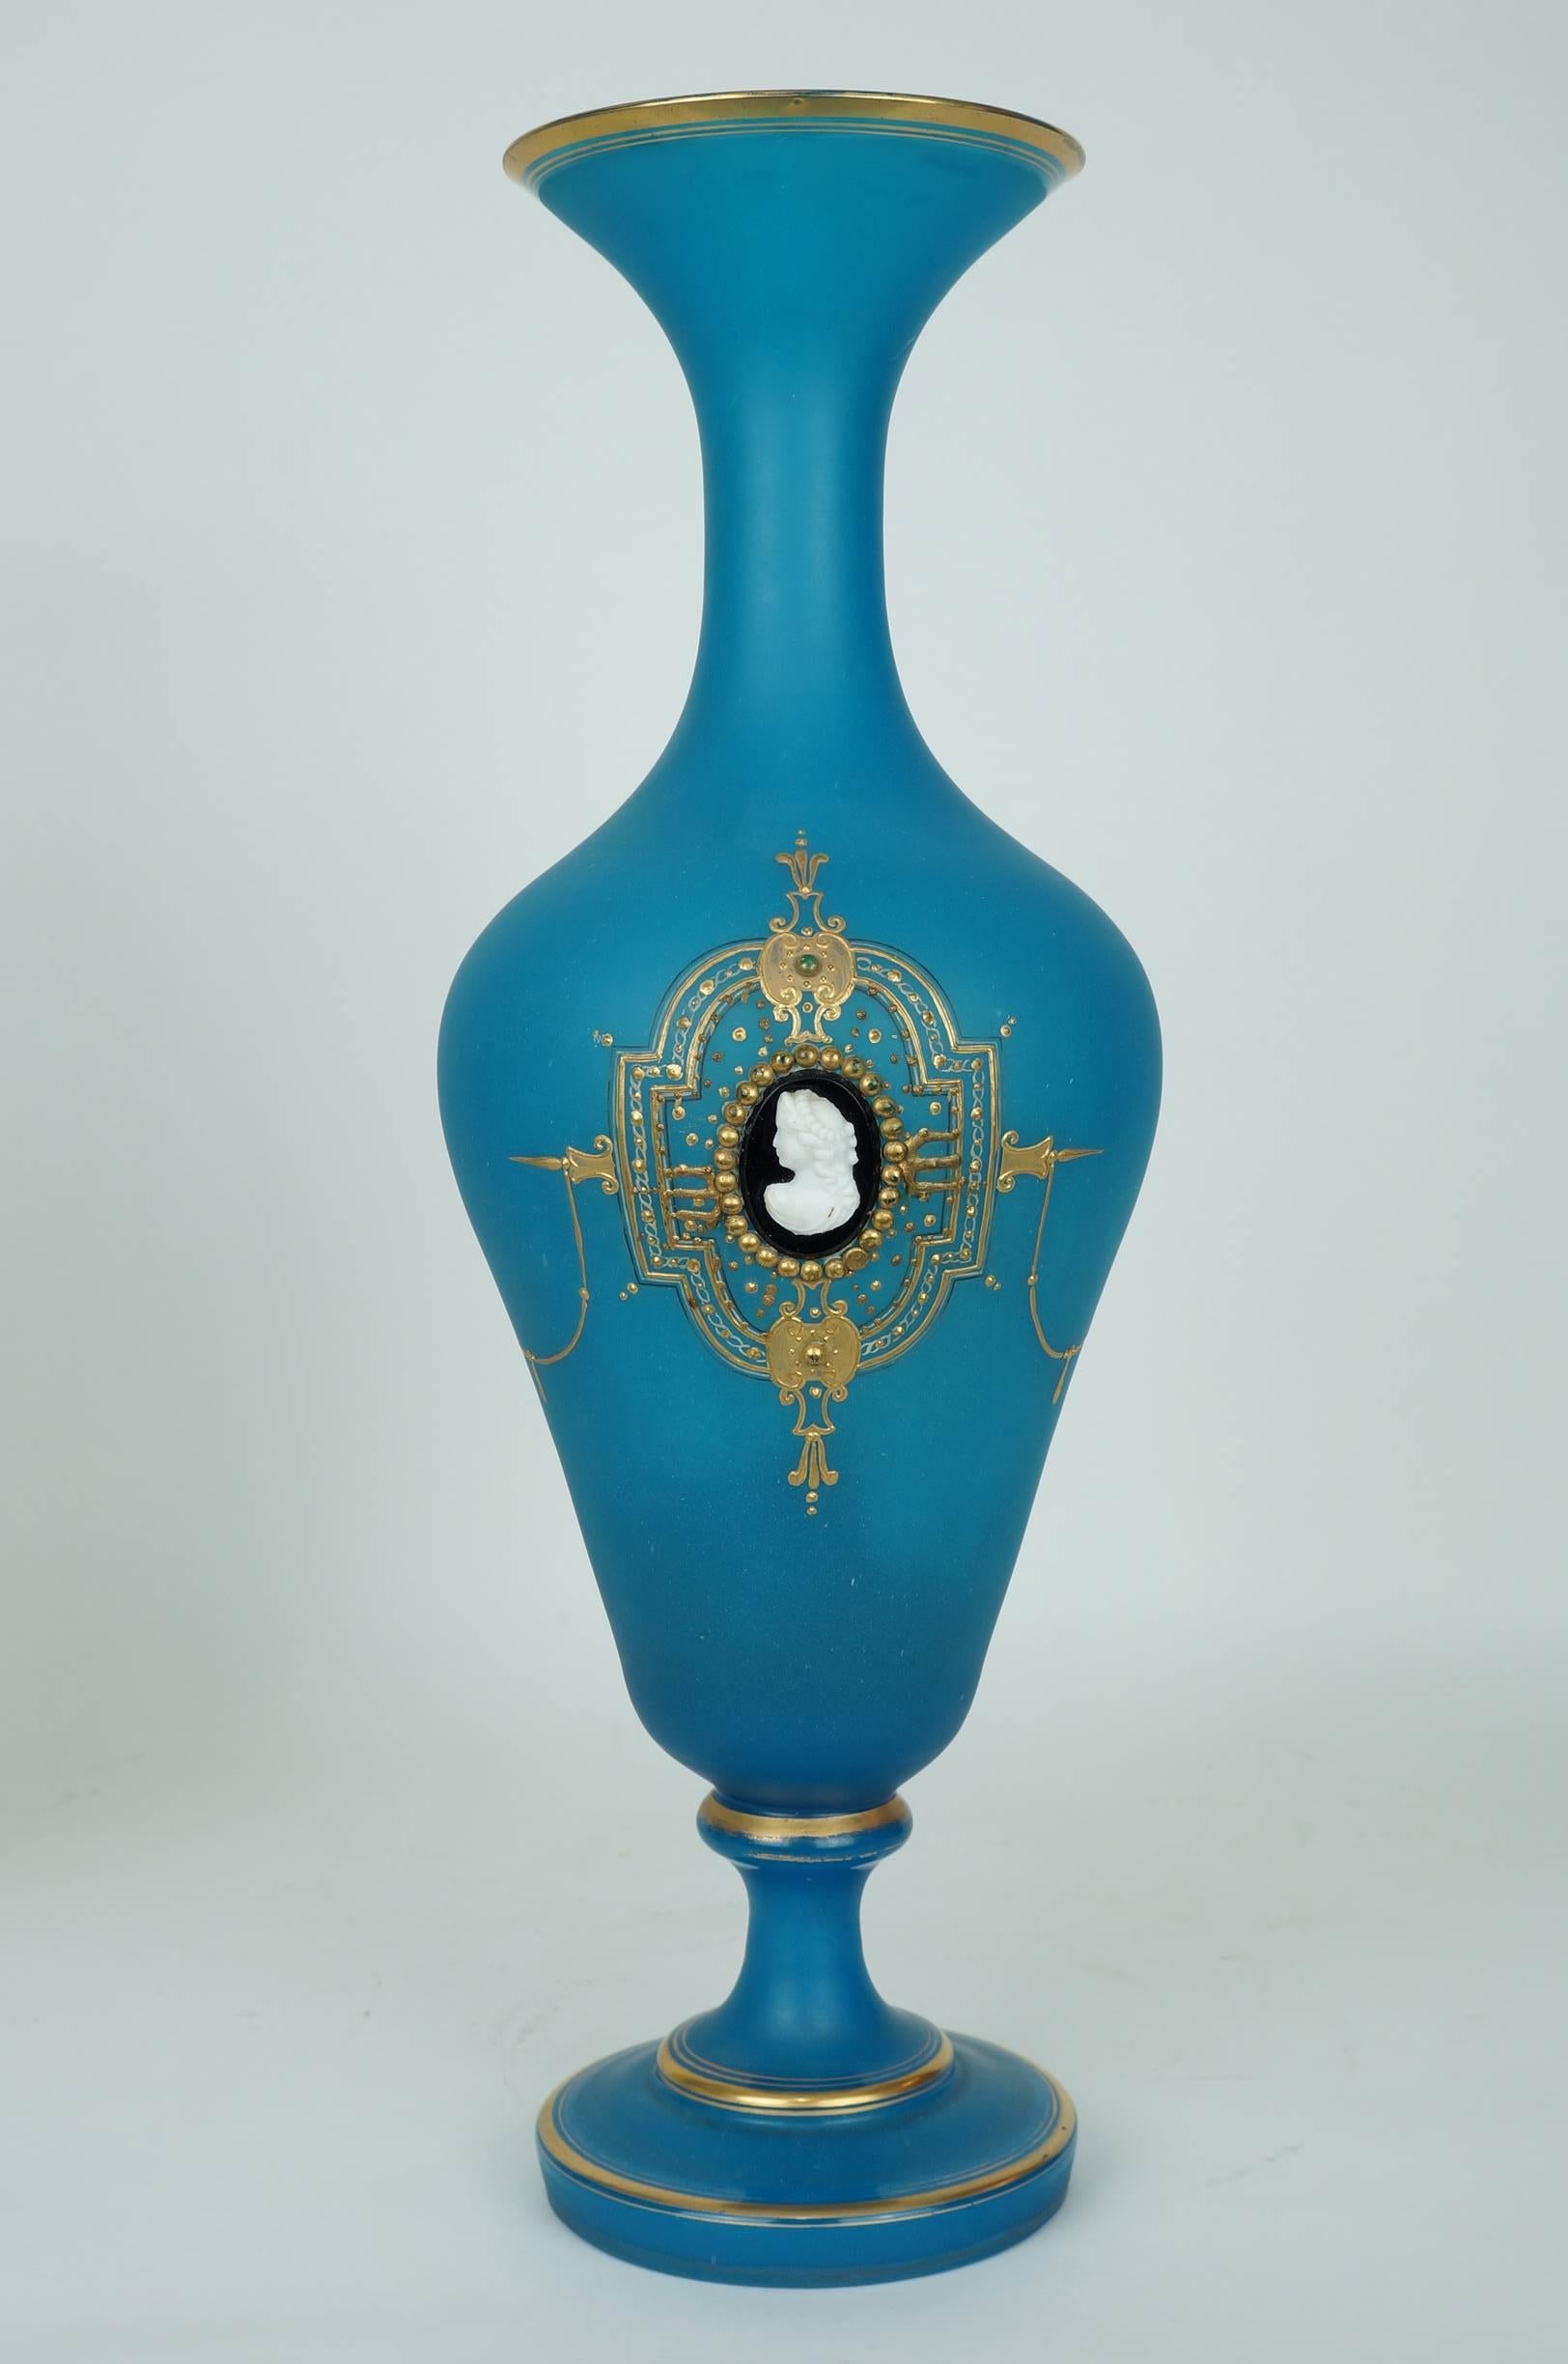 Pair of Blue Opaline Glass Tall Vases with Applied Cameo Glass Portraits 
Stock Number: G35